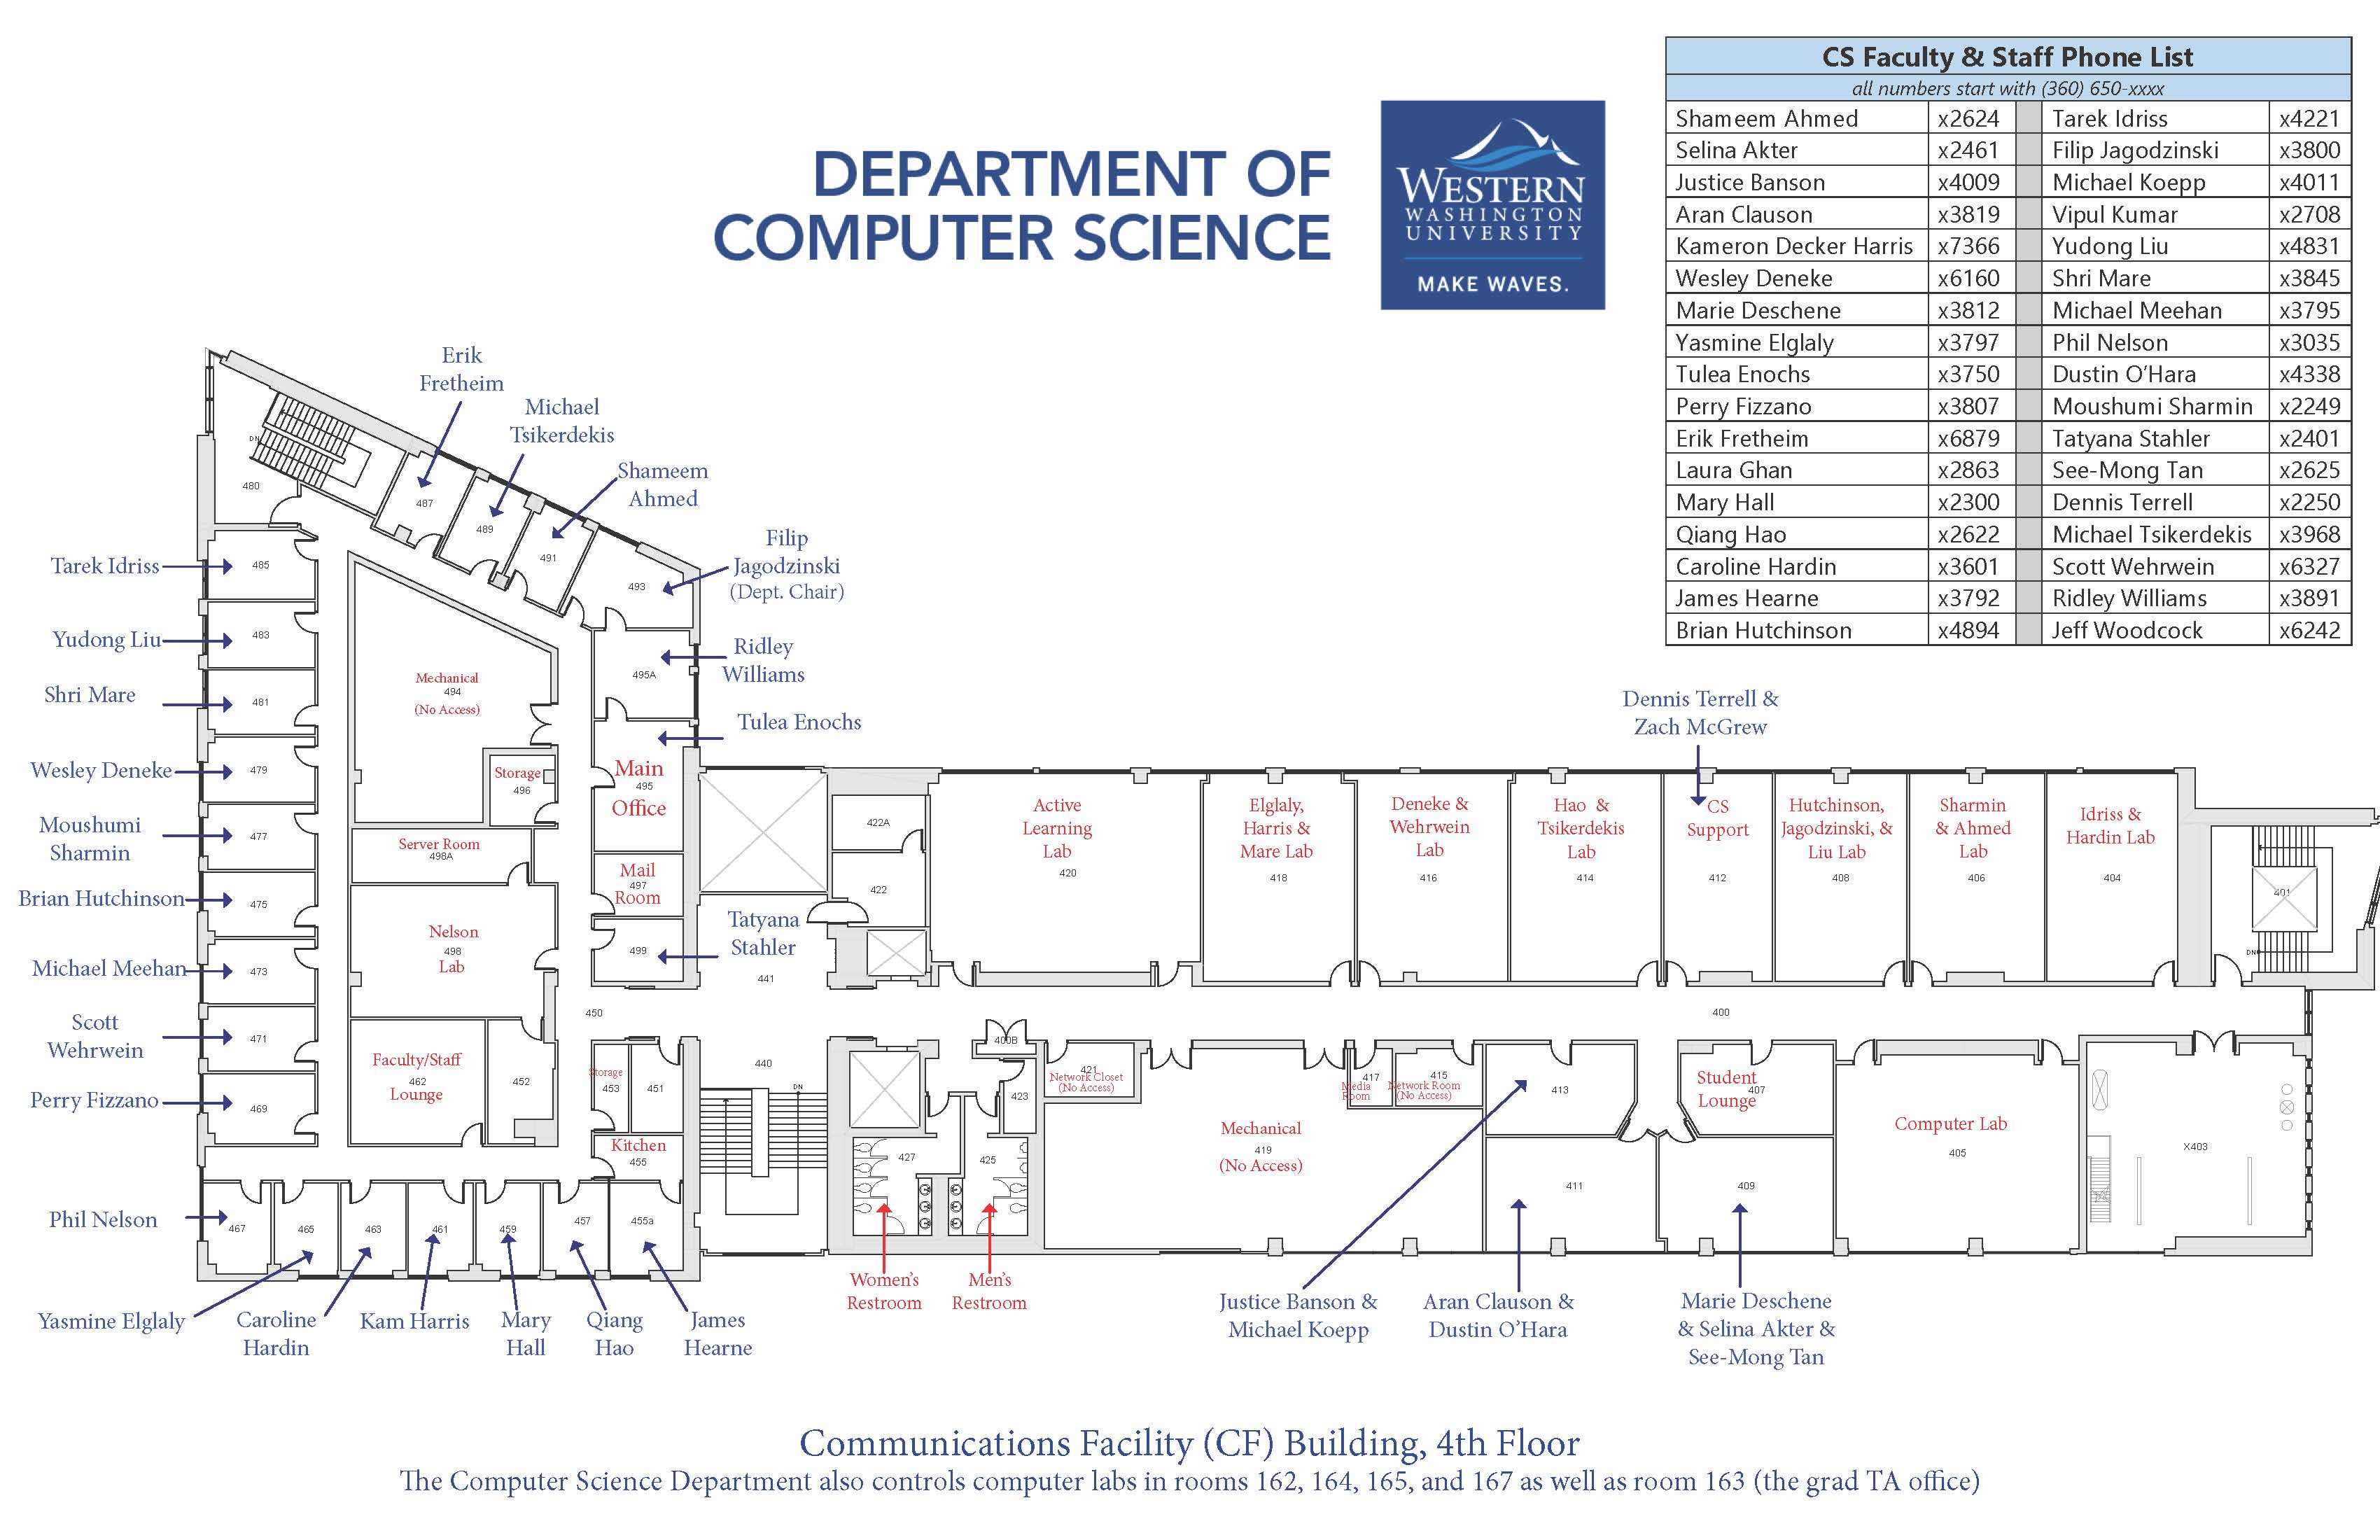 Department Directory Map